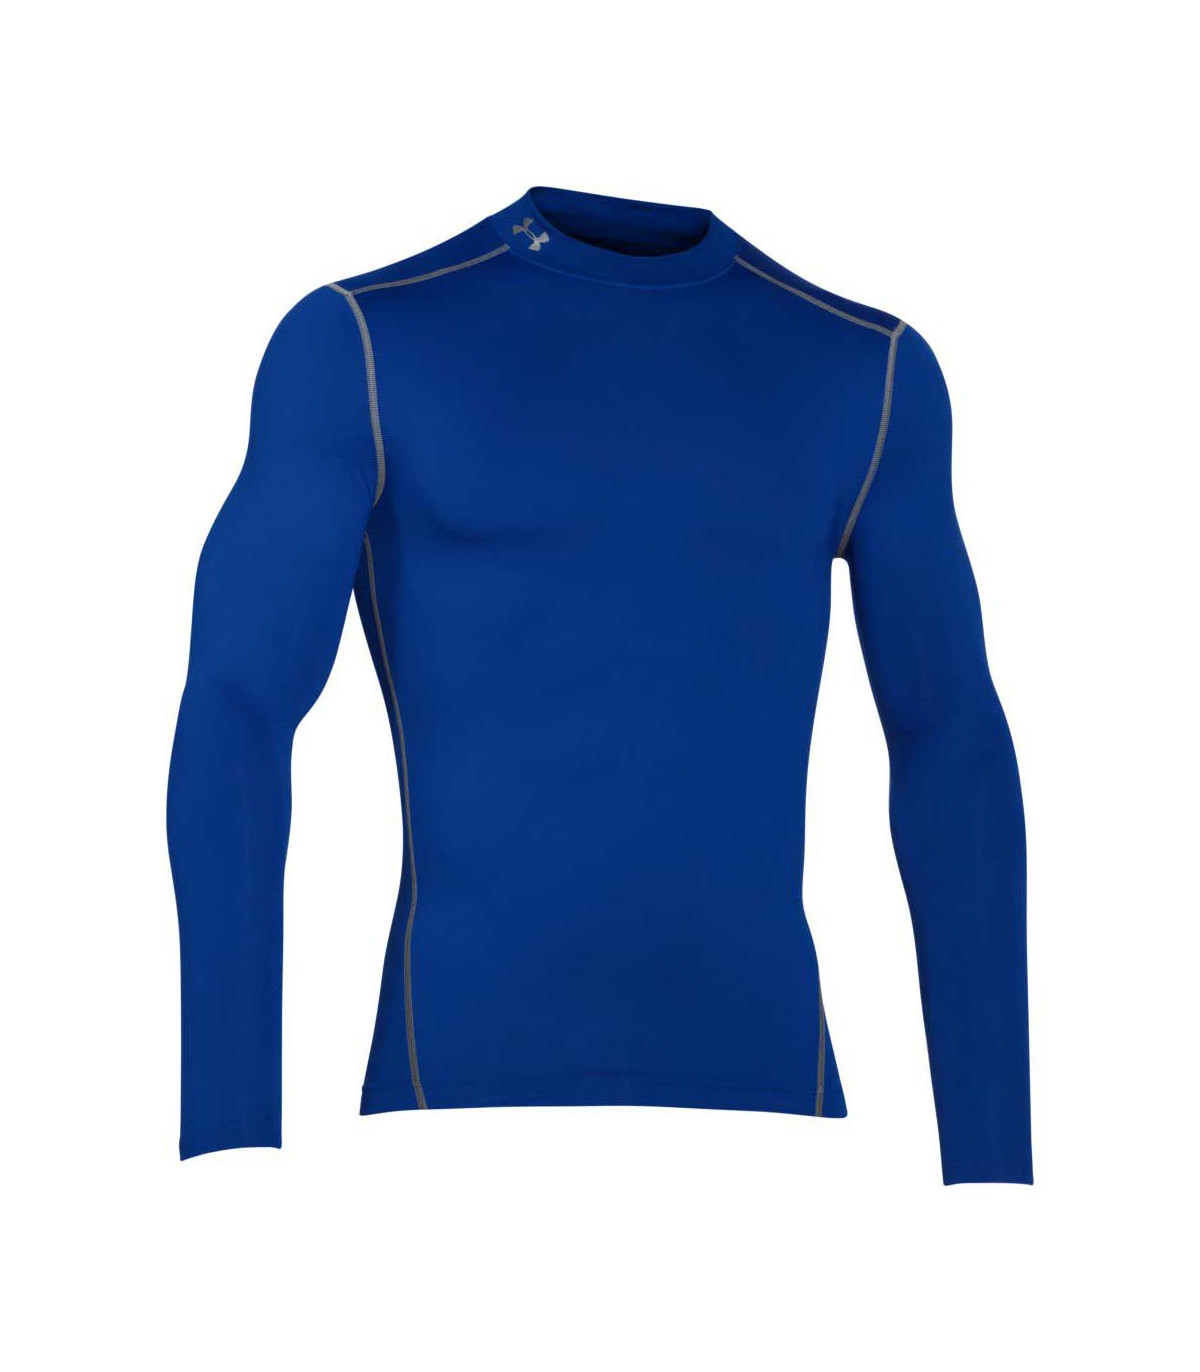 COMPRESSION BASELAYER RUGBY COLDGEAR - UNDER ARMOUR at shop Rugby-C